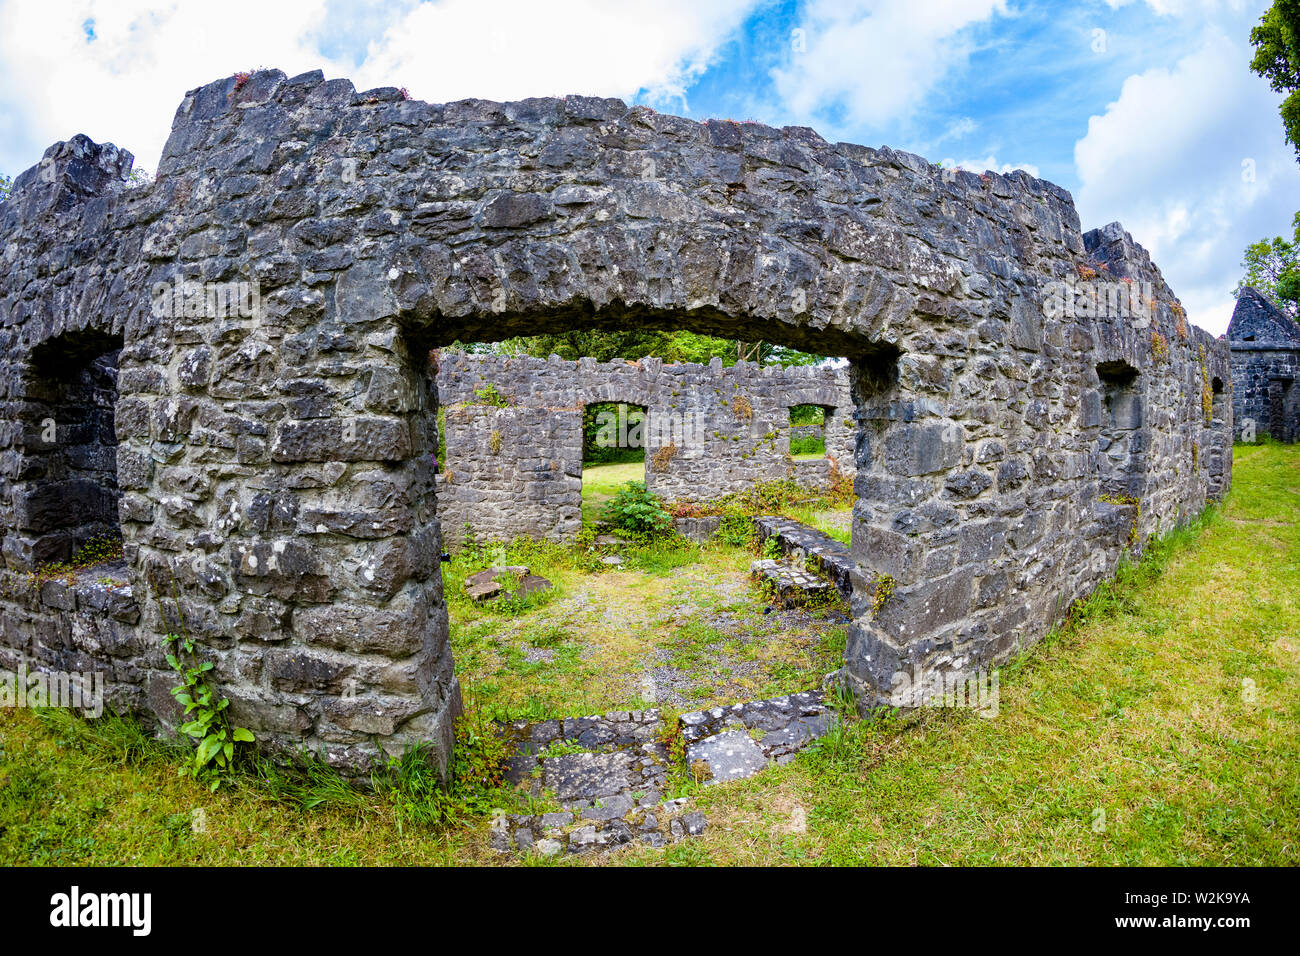 Medieval ruins near Thoor Ballylee Castle or Yeats Tower  in town if Gort County Galway Ireland Stock Photo